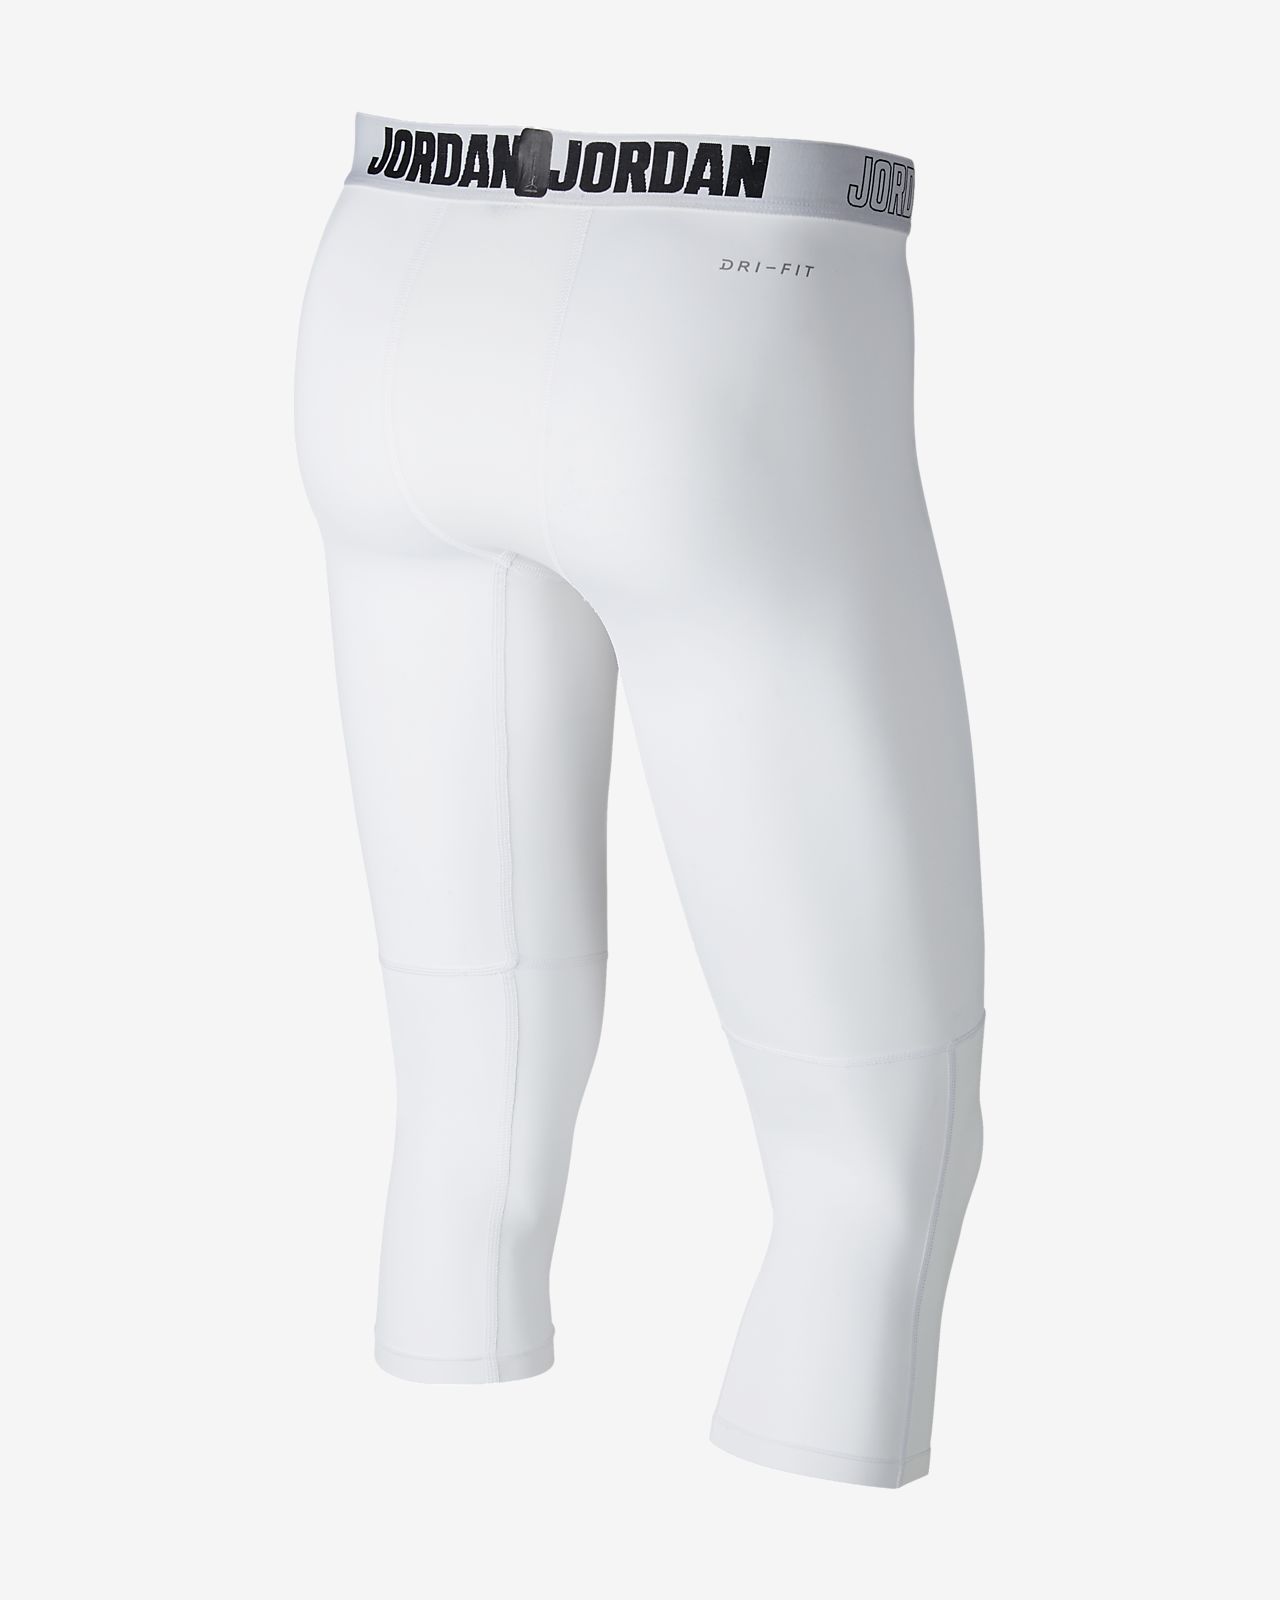 Nike Compression Tights 3 4 Size Chart